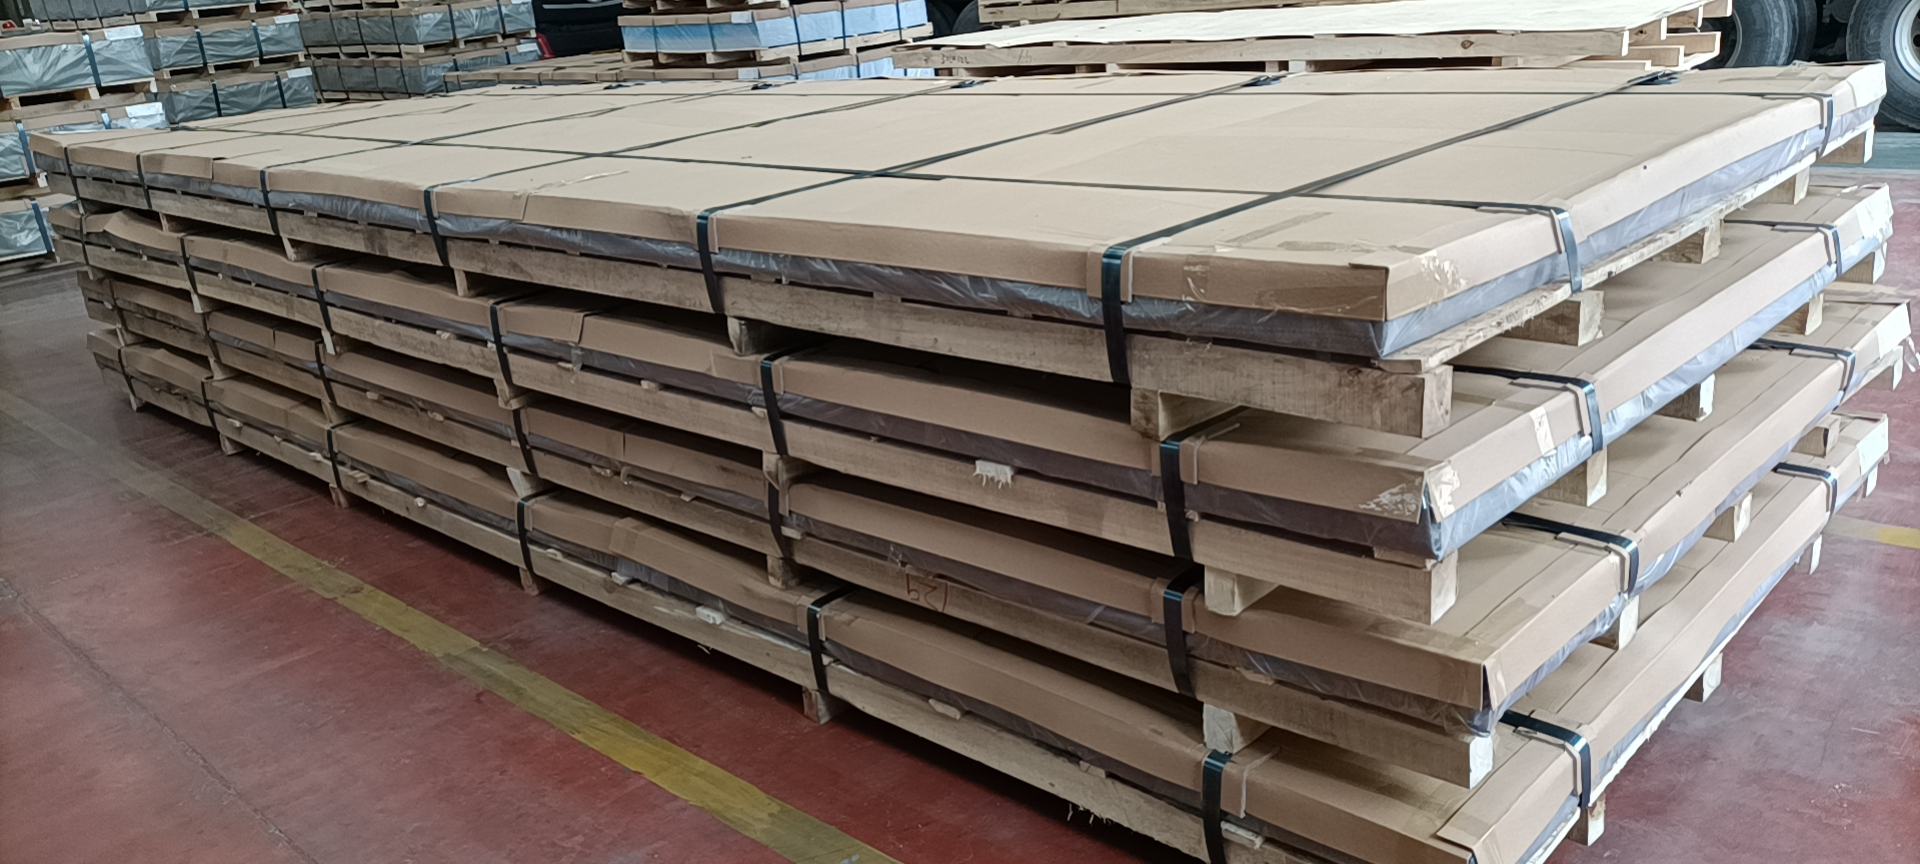 UAE regular customers reorder aluminum plate for many times